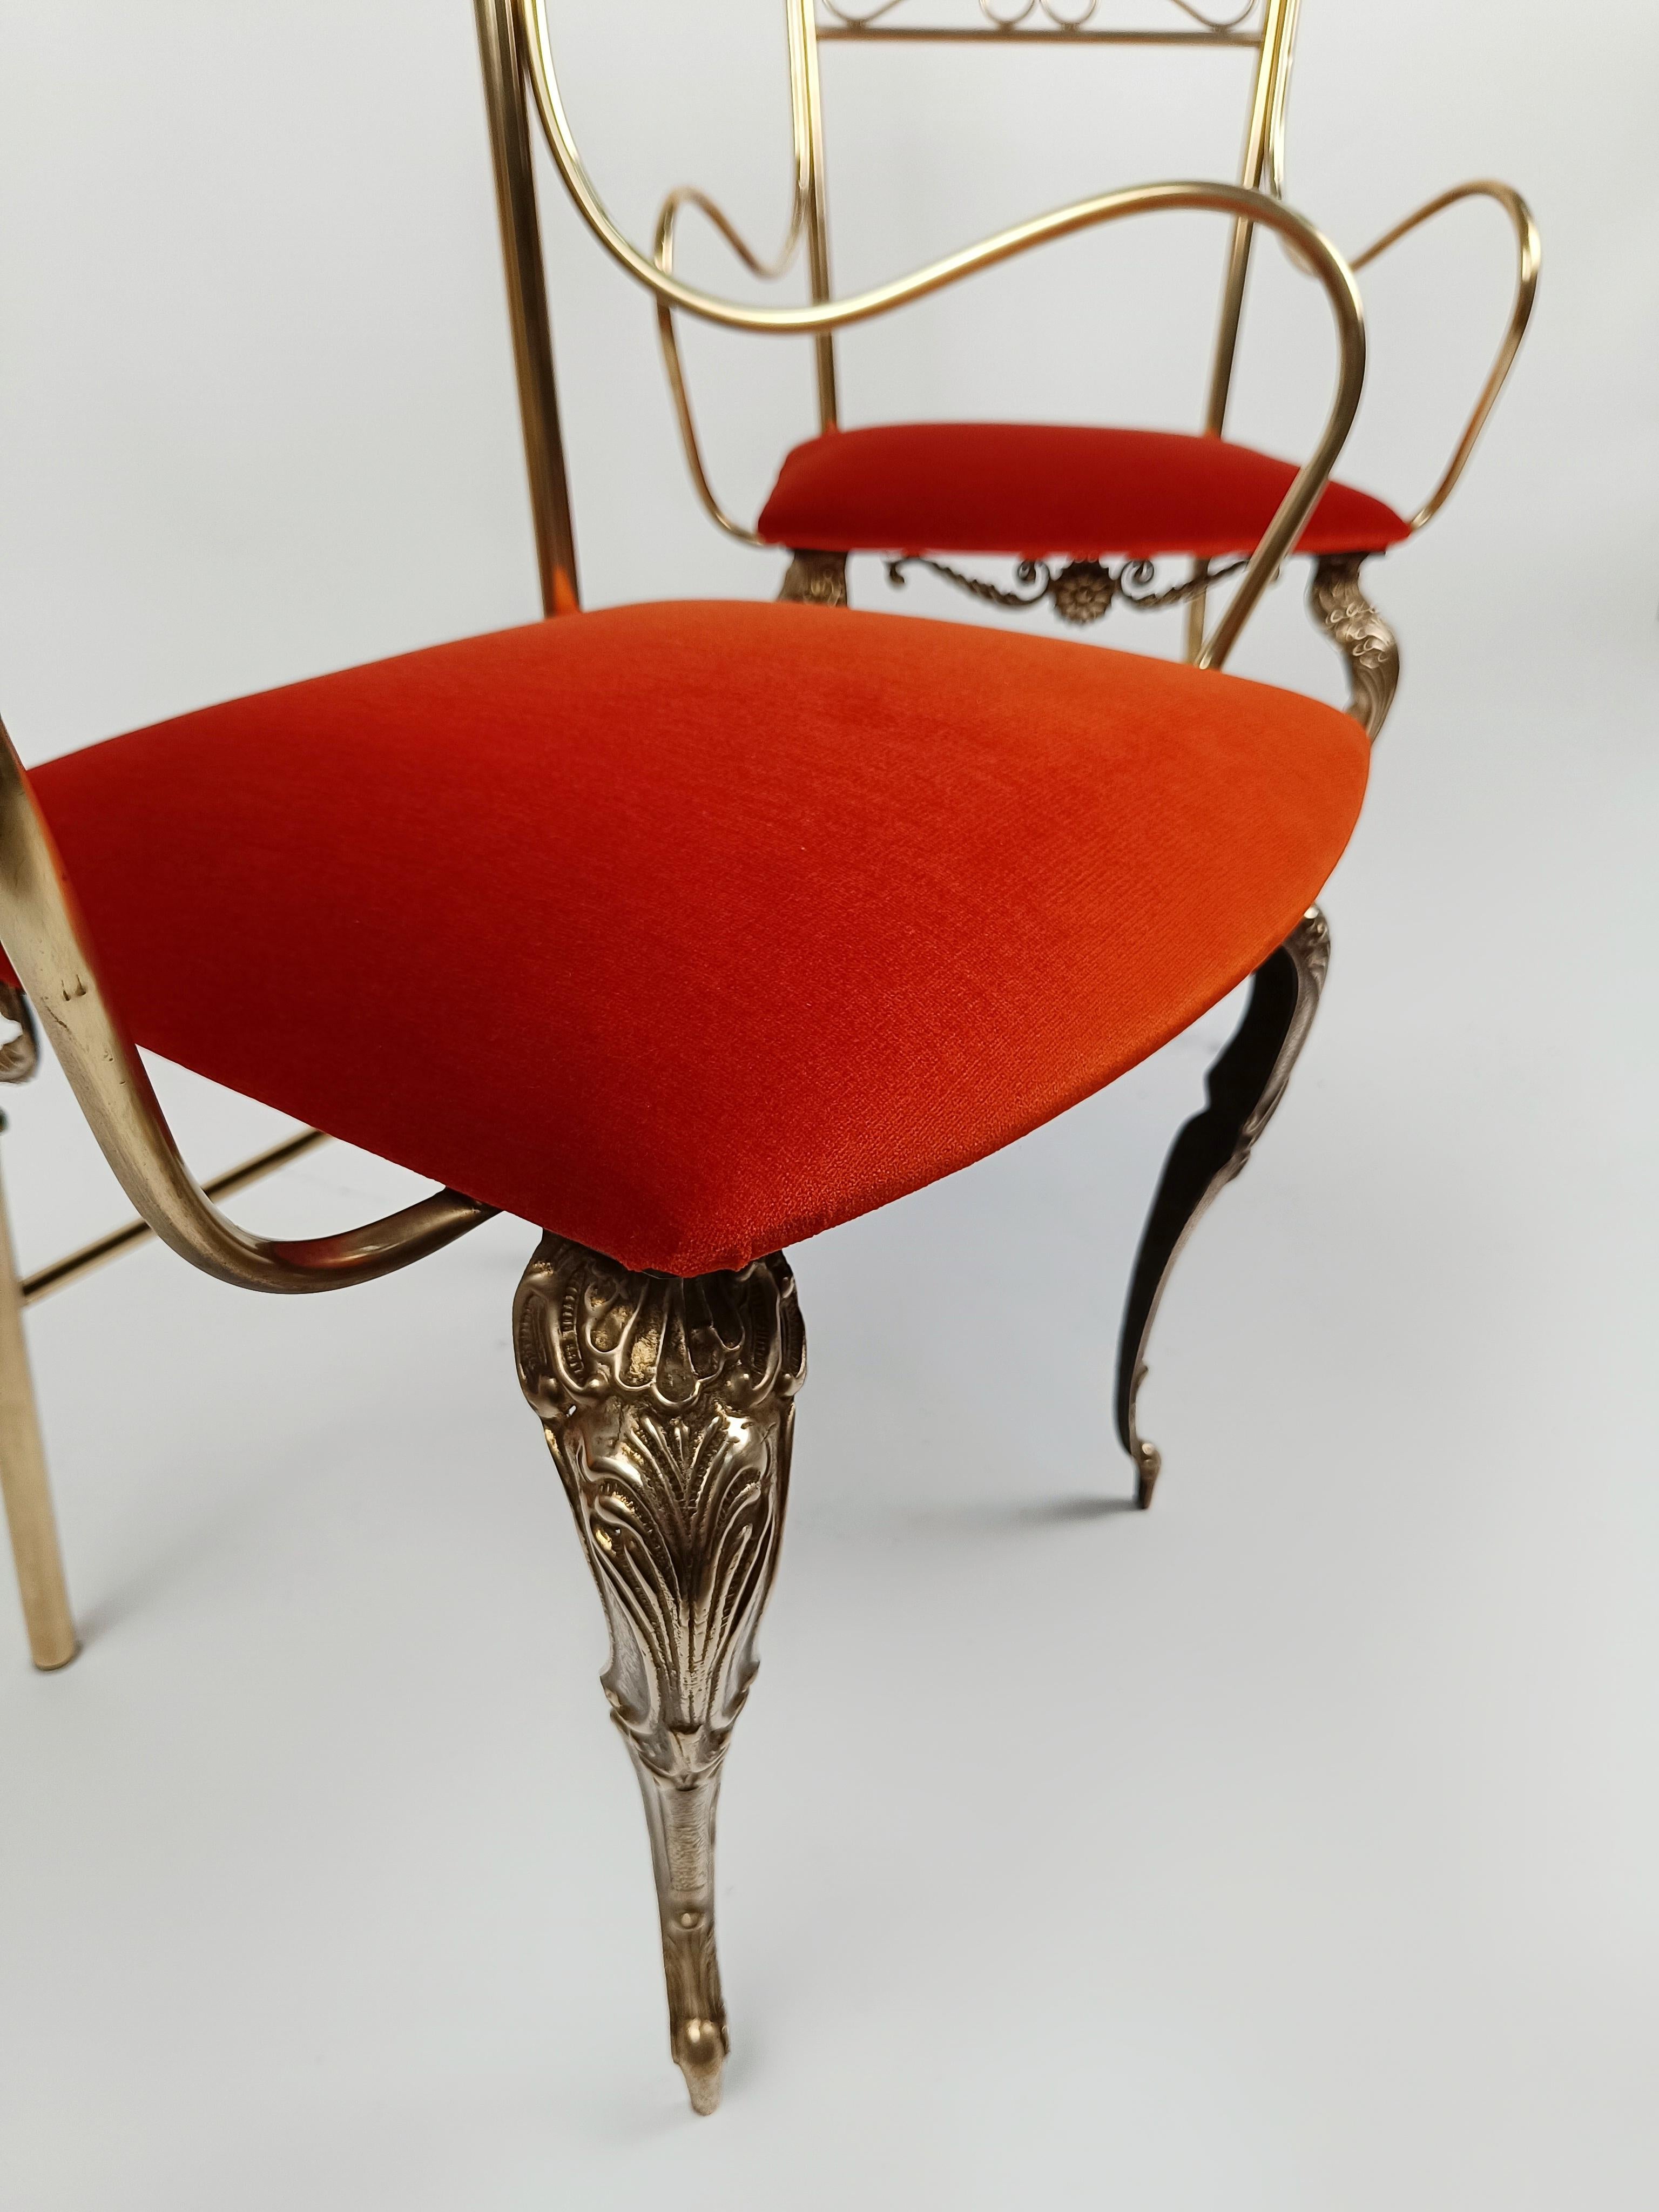 A Pair of Italian midcentury side chairs that look like they came out of a fairy tale book.
These vintage chairs differ from the Classic Chiavari-style side chairs as they are equipped with armrests, rare elements to find, and for the less linear